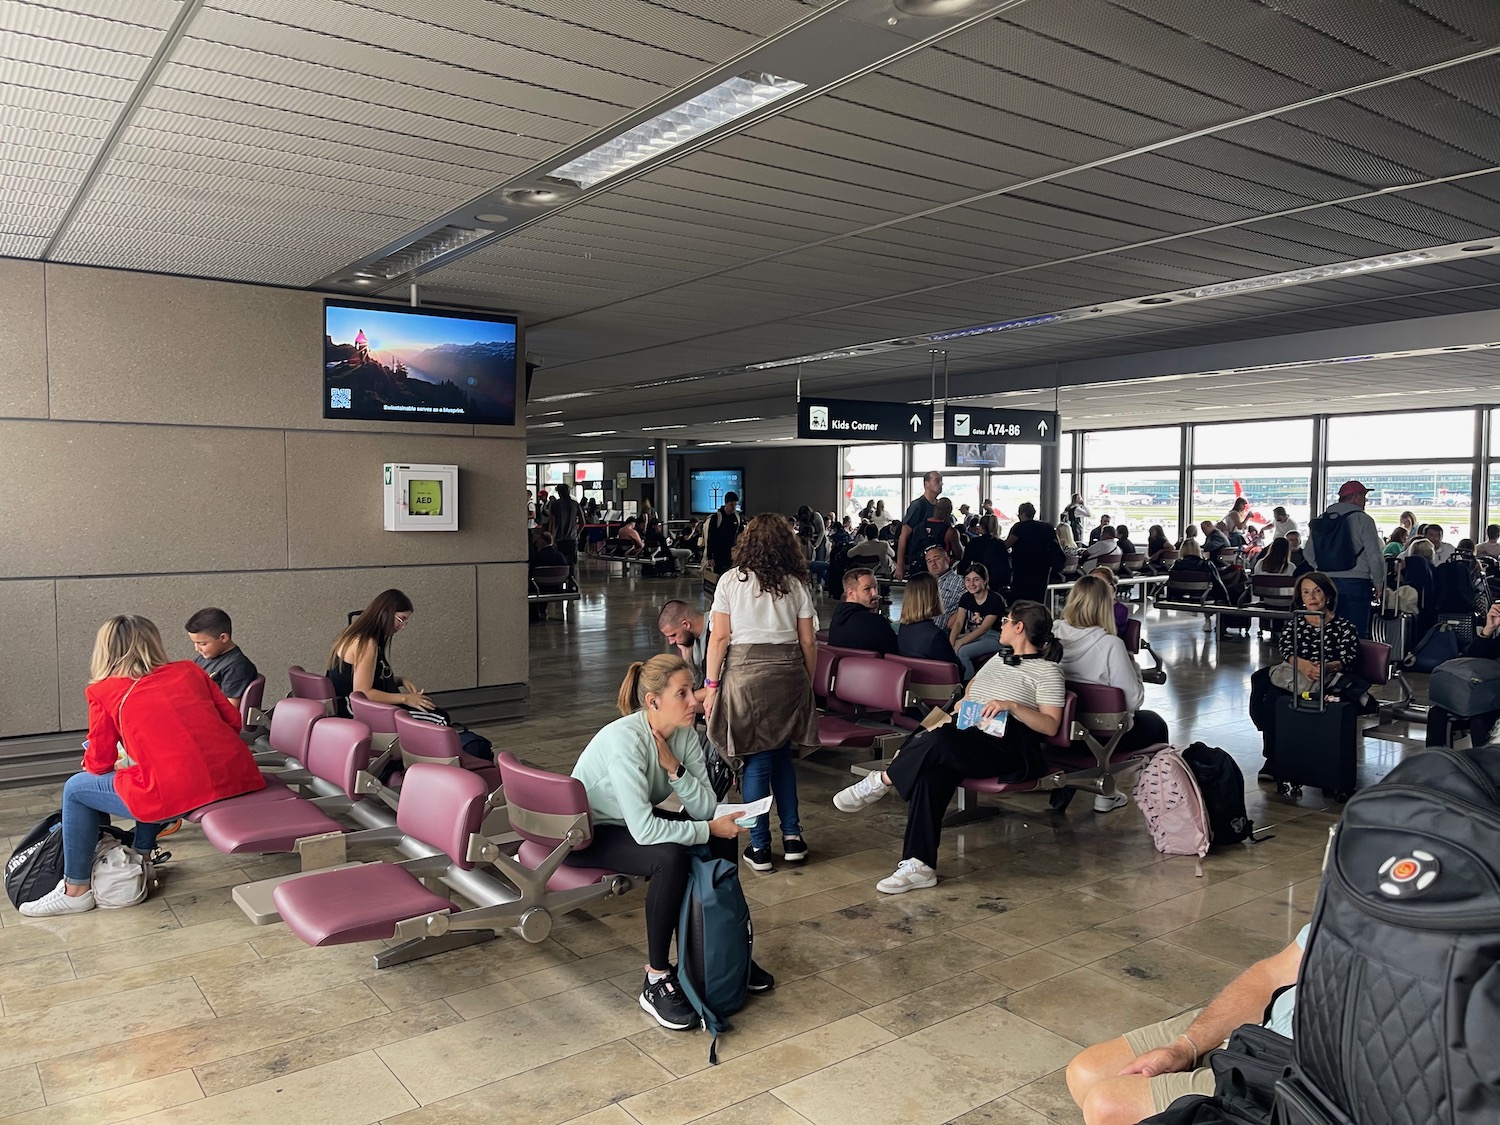 a group of people sitting in chairs in an airport